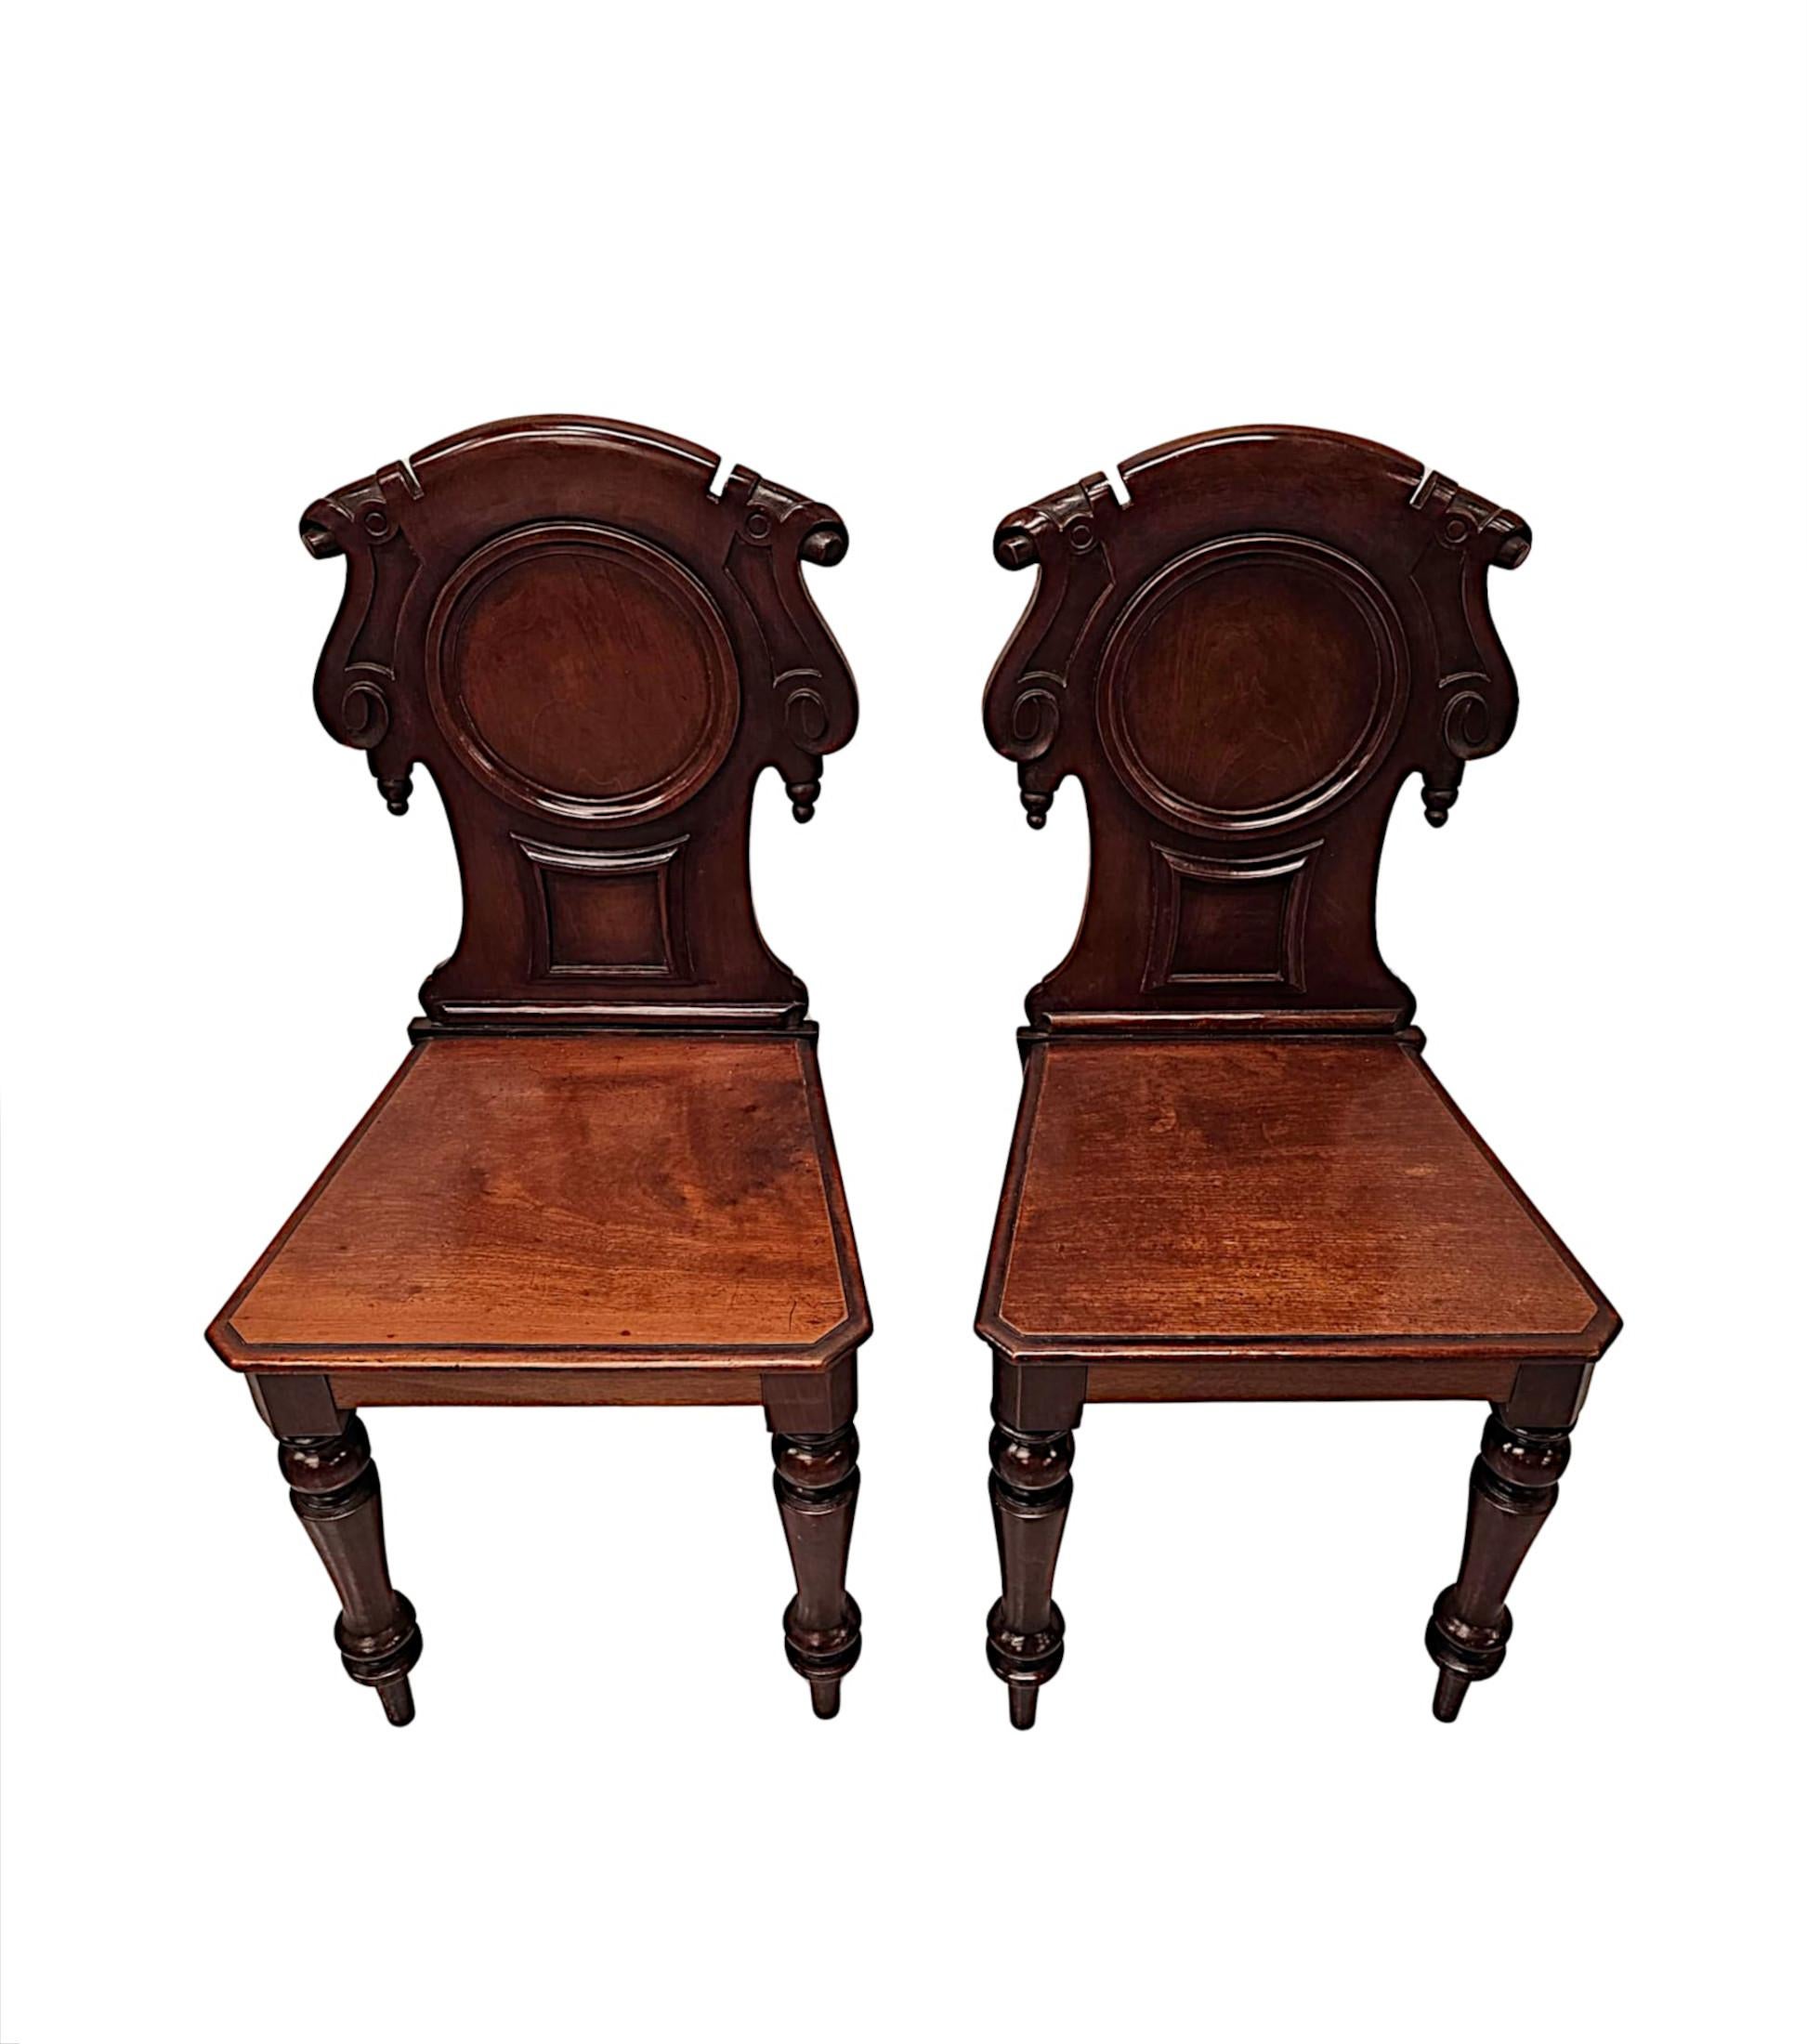 English A Very Fine Pair of 19th Century Mahogany Hall Chairs For Sale